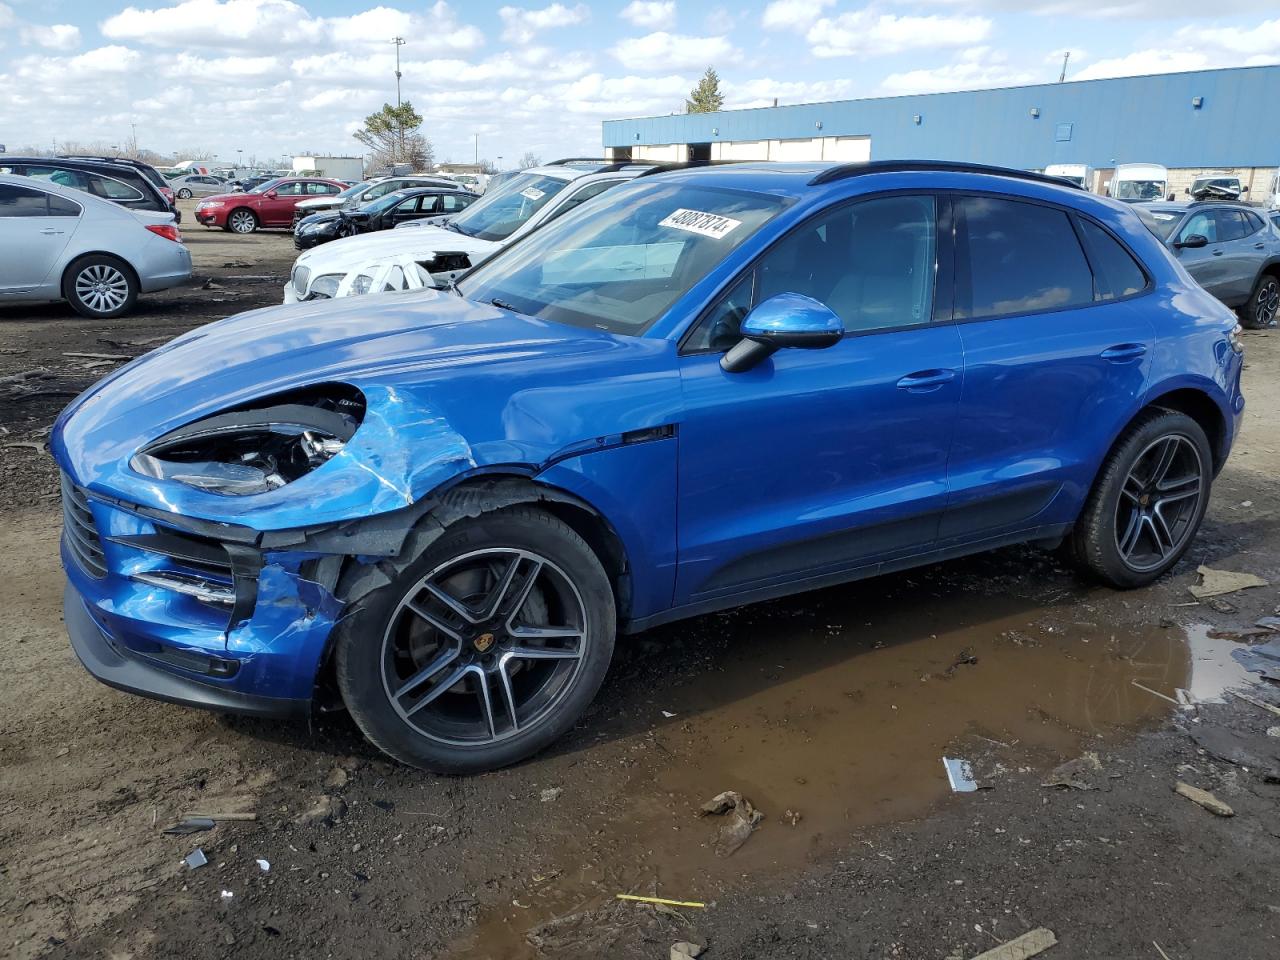 vin: WP1AB2A52KLB32147 WP1AB2A52KLB32147 2019 porsche macan 3000 for Sale in 48183 4366, Mi - Detroit, Woodhaven, Michigan, USA